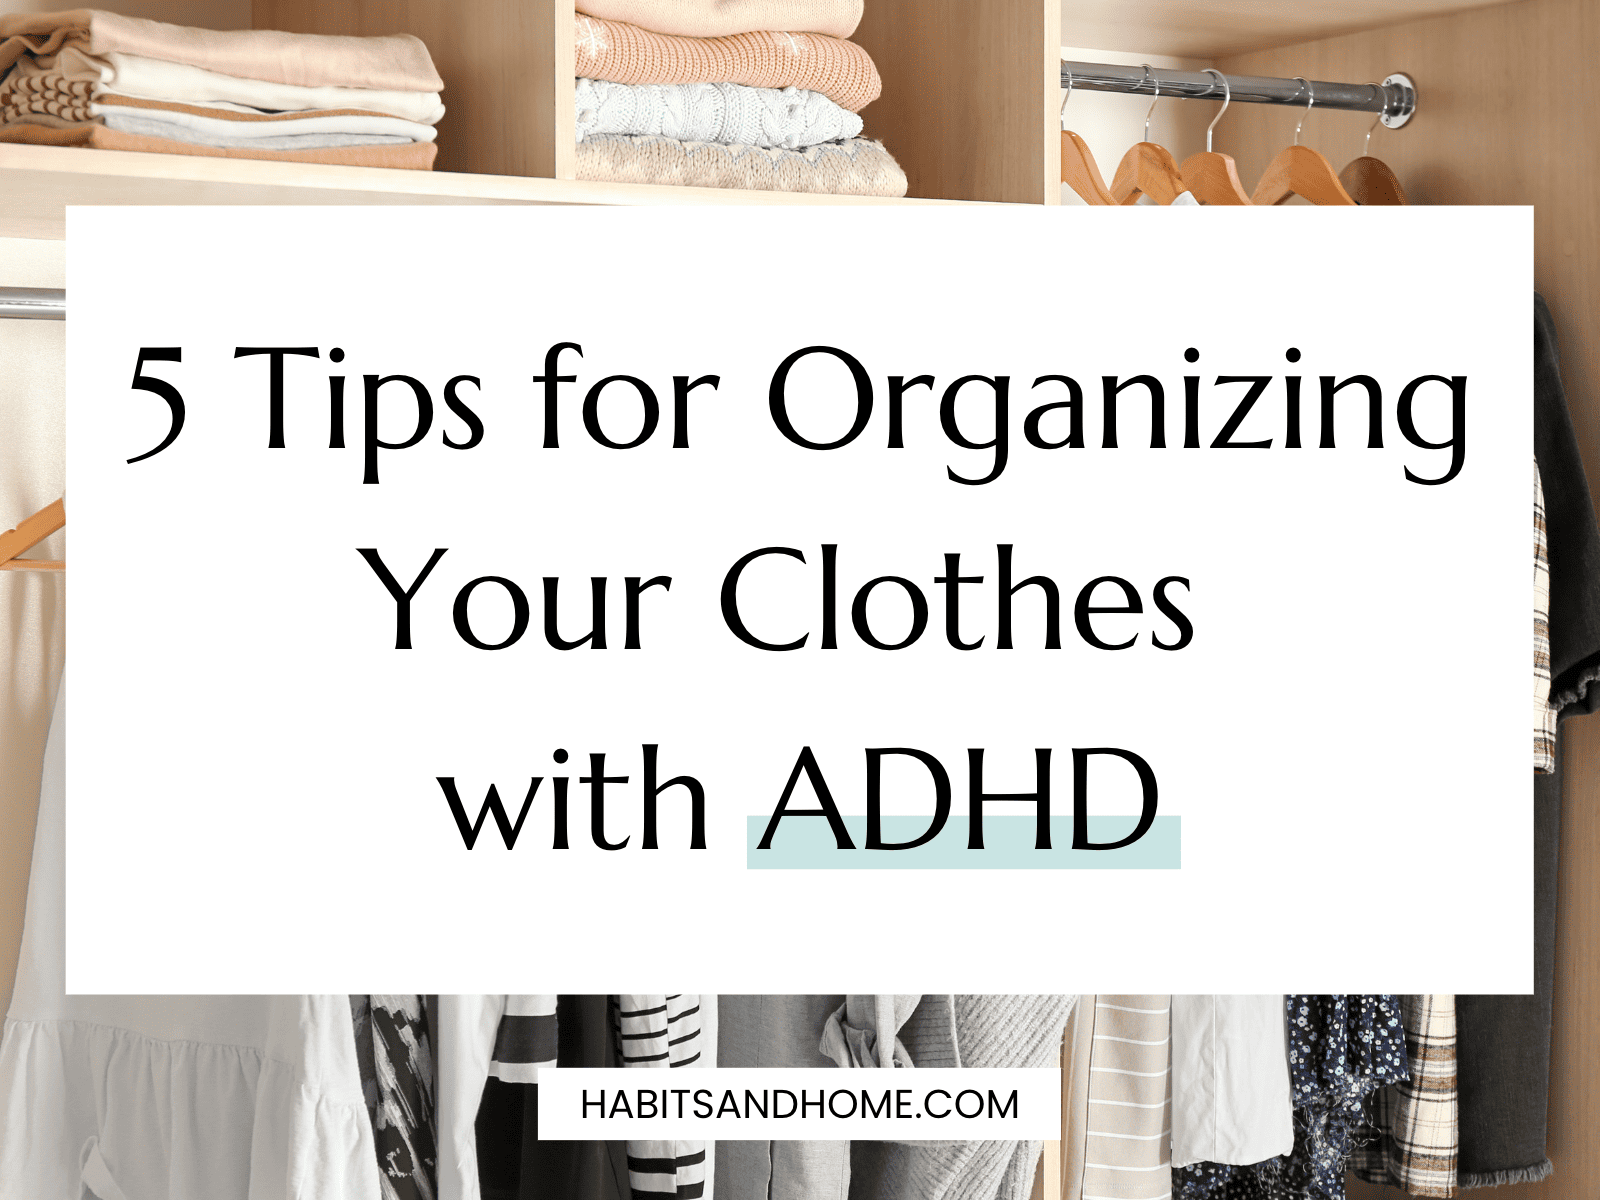 https://habitsandhome.com/wp-content/uploads/2023/01/5-tips-for-organizing-your-closet-with-adhd.png